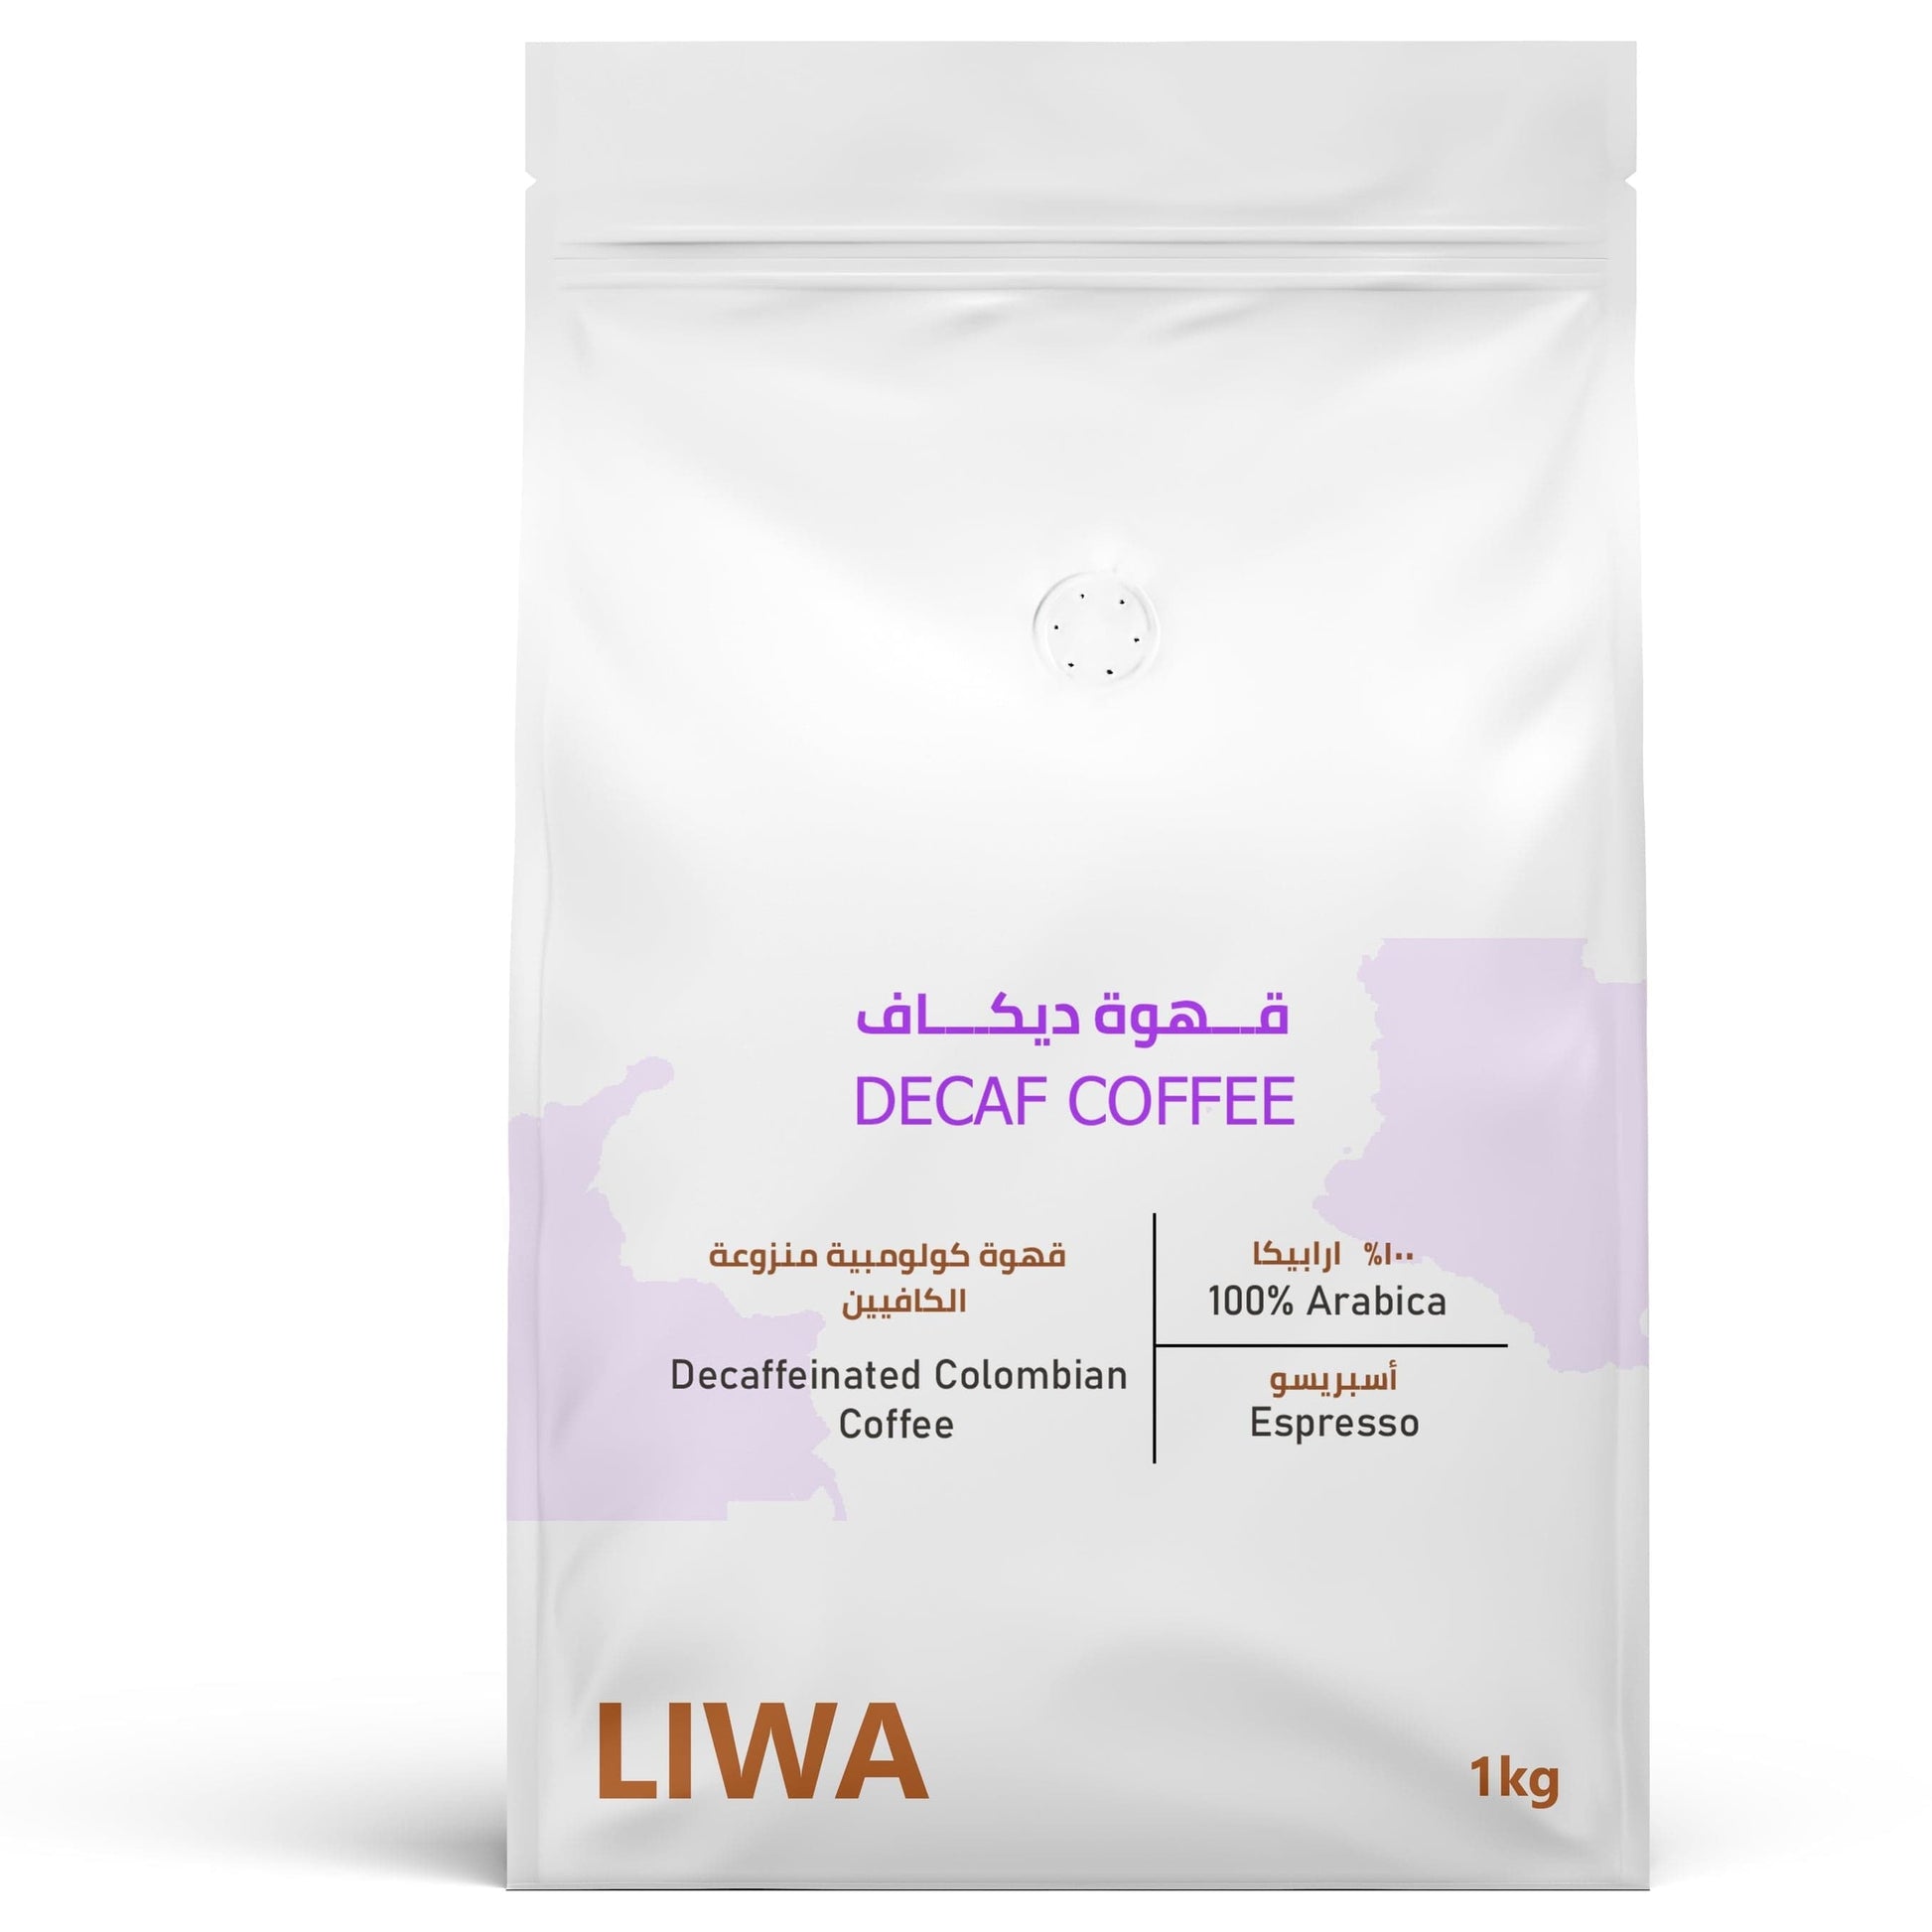 Decaf Coffee - Premium Specialty Coffee from Liwa Coffee Roastery - Just Dhs. 38! Shop now at Liwa Coffee Roastery